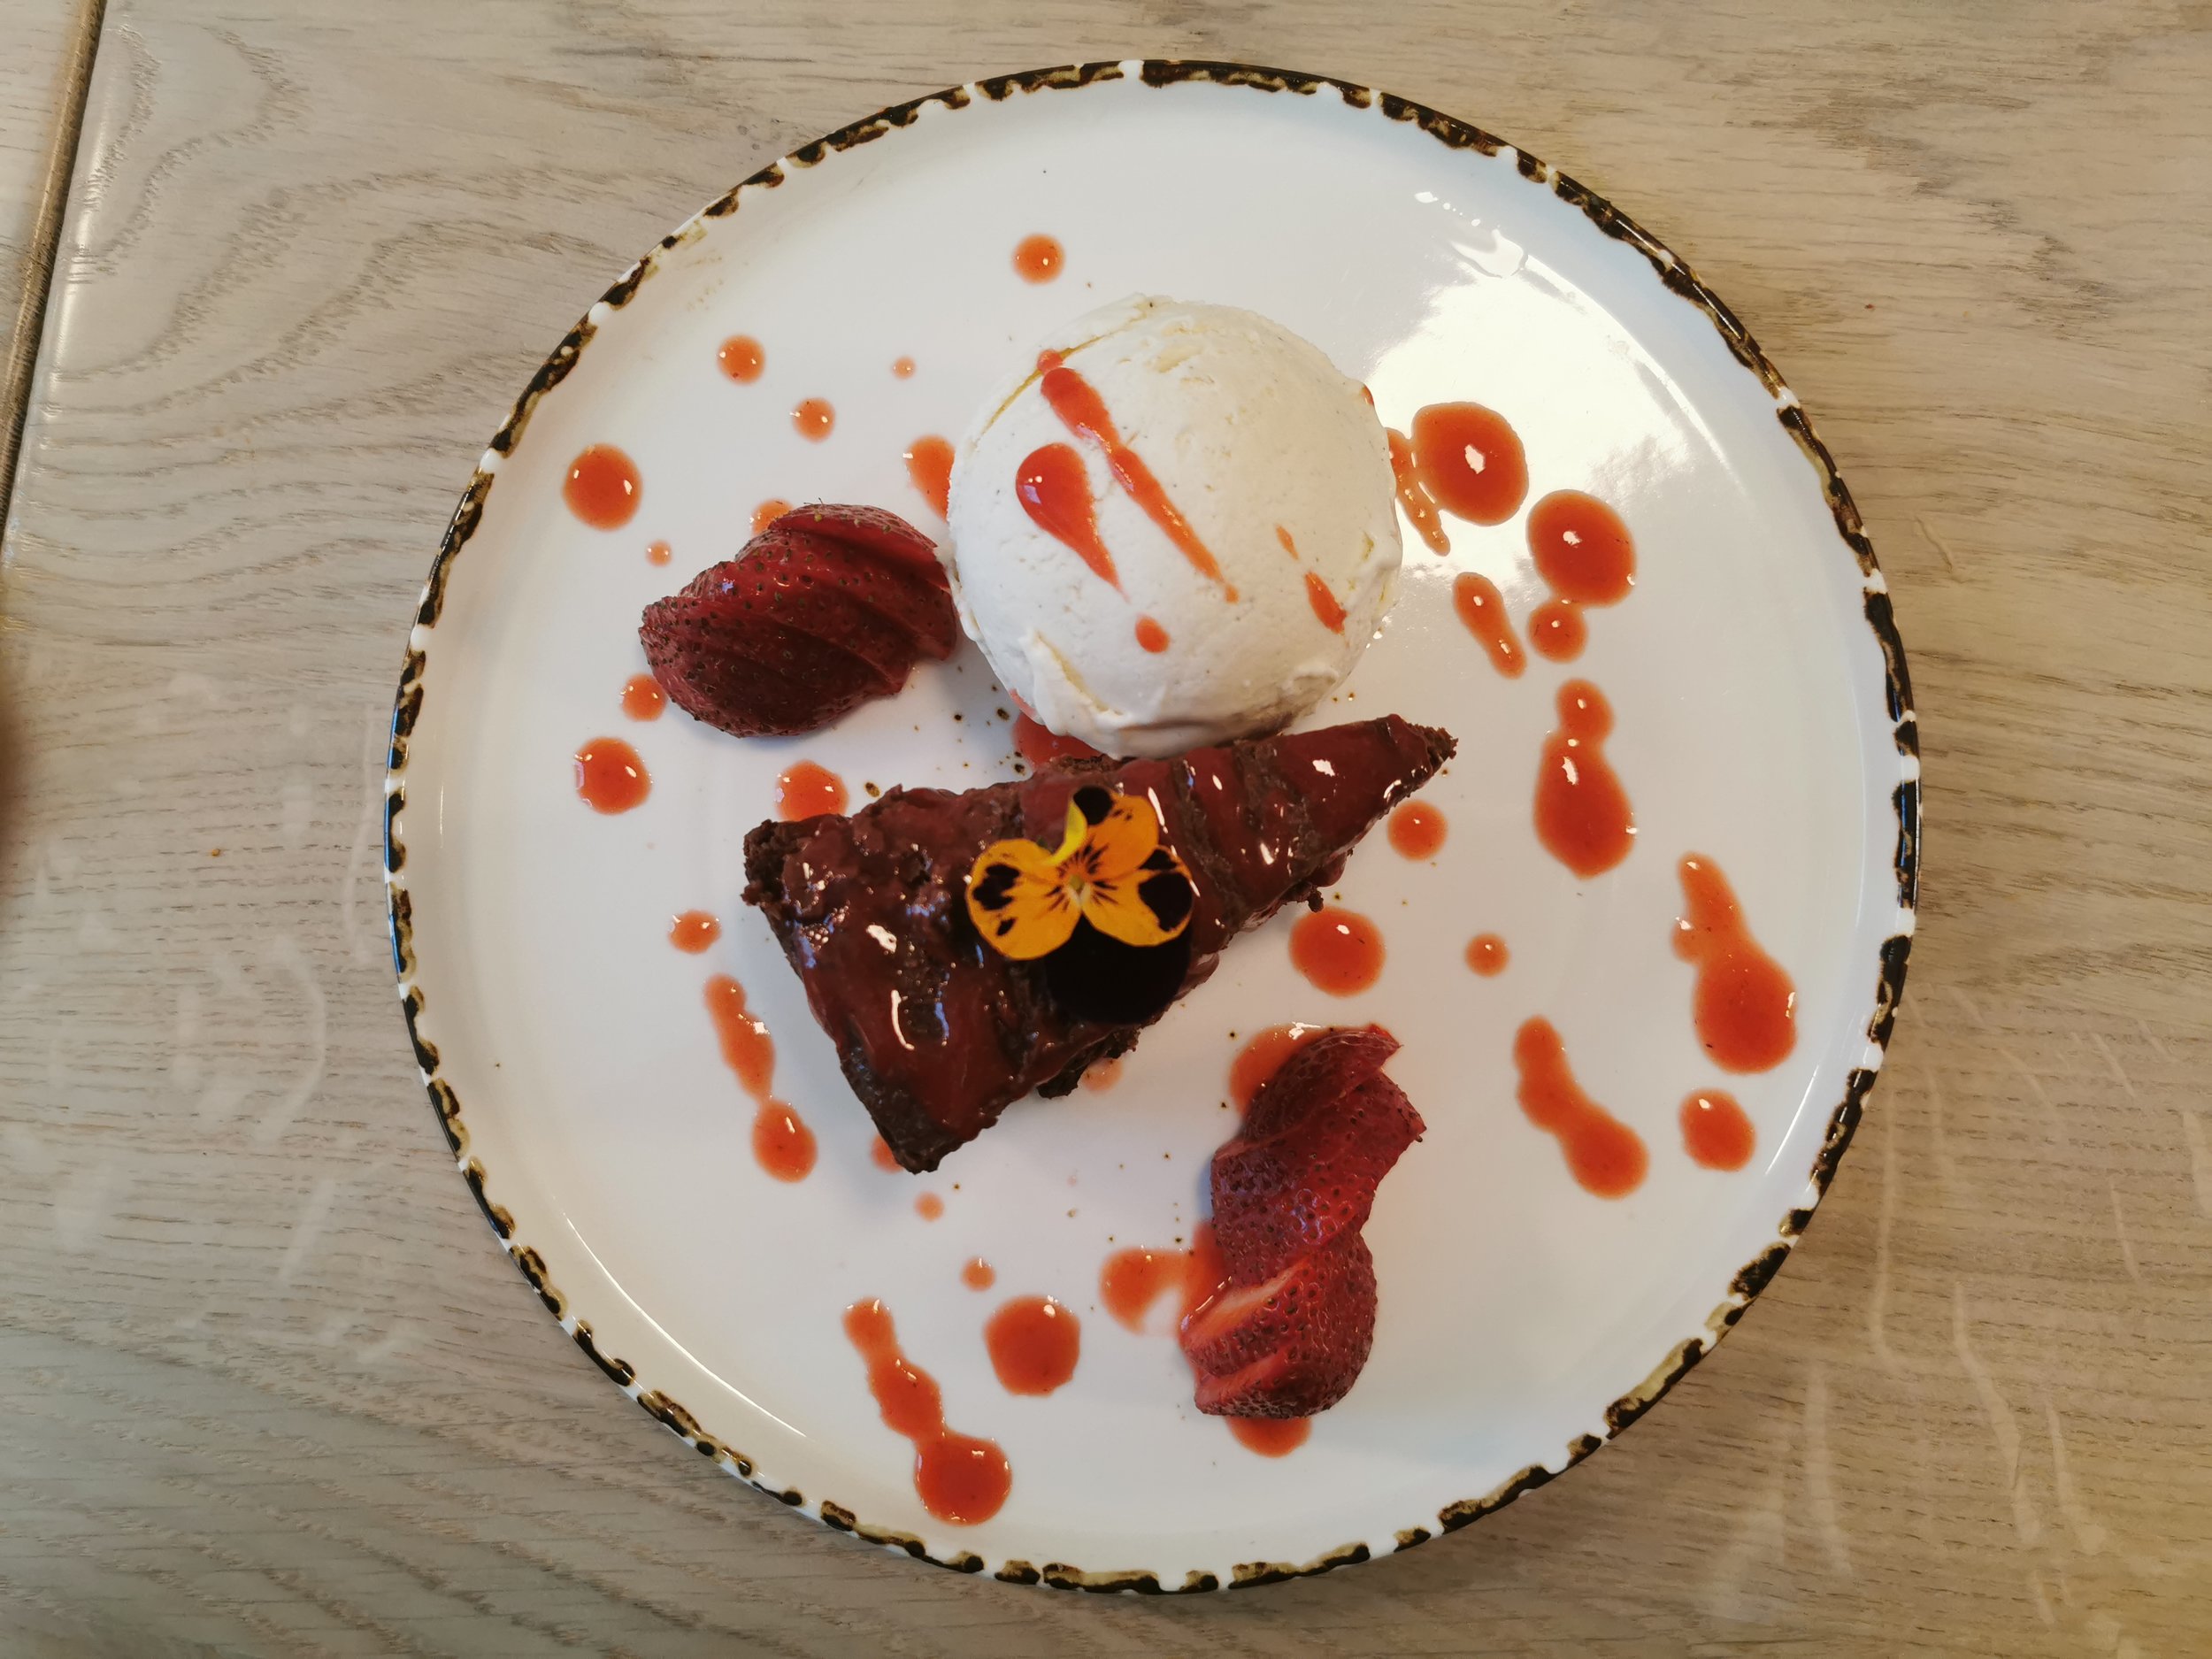 Stem + Glory: Chocolate Almond cake with strawberry coulis 